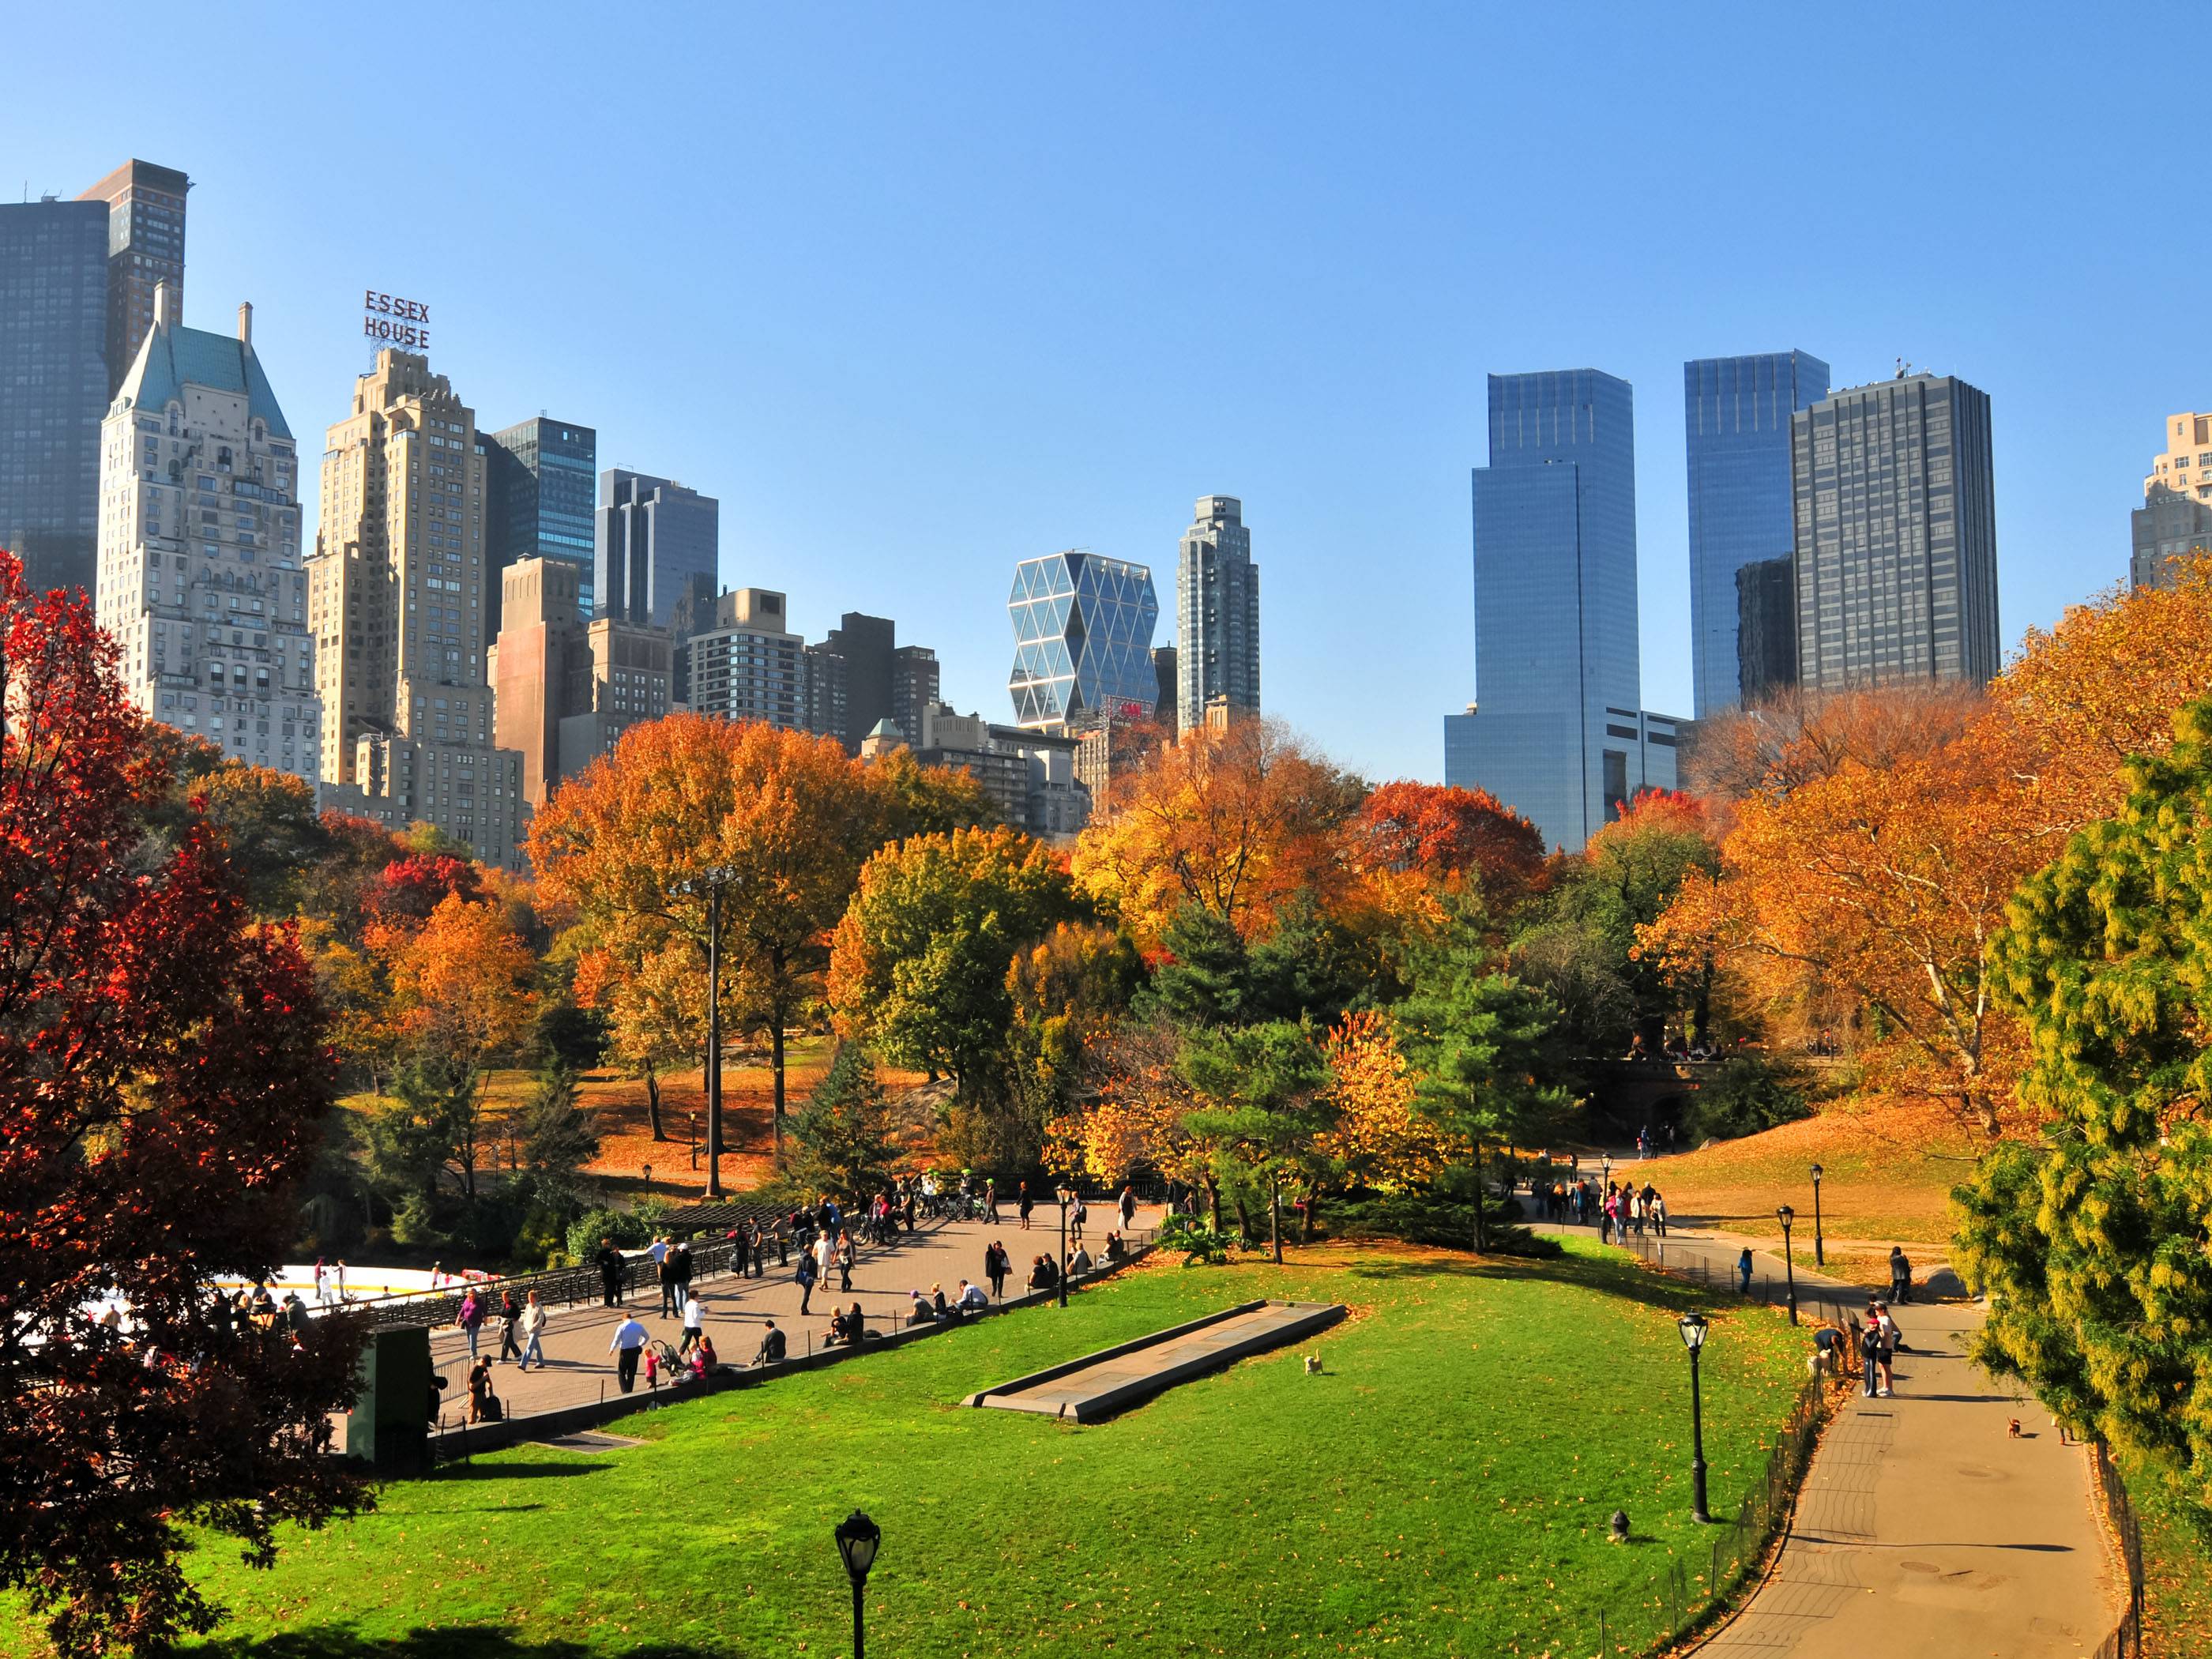 Central Park In Nyc During Autumn. HQ Wallpaper for PC